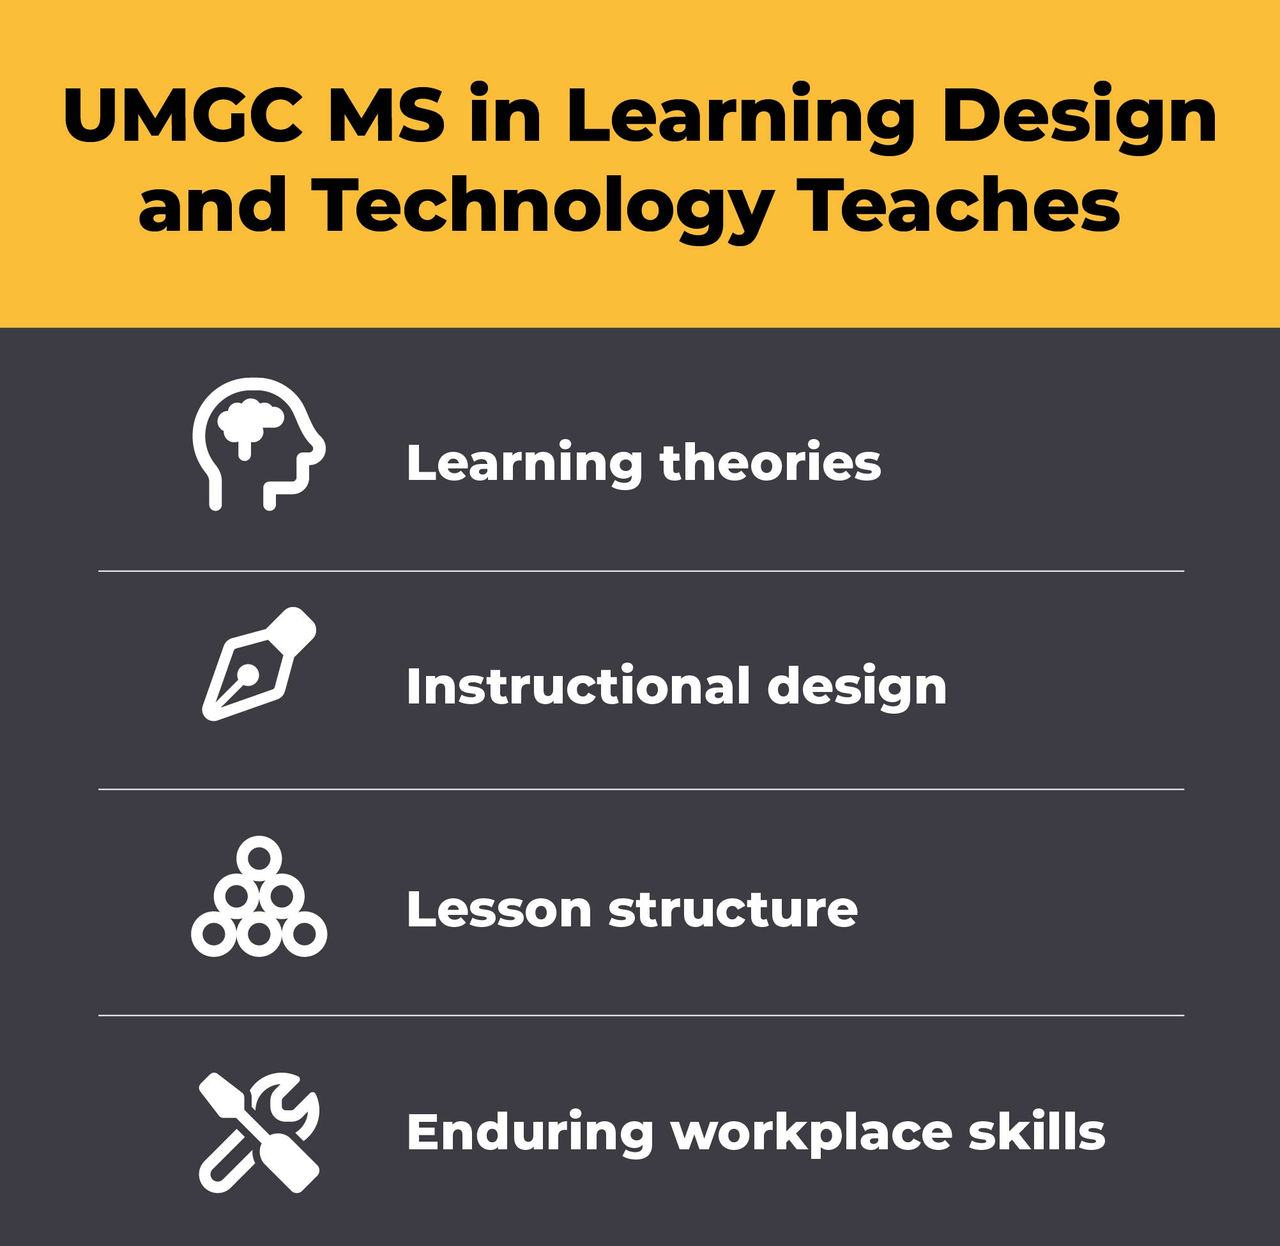 Text that reads, "UMGC MS in Learning Design and Technology Teaches: Learning theories; Instructional design; Lesson structure; Enduring workplace skills."